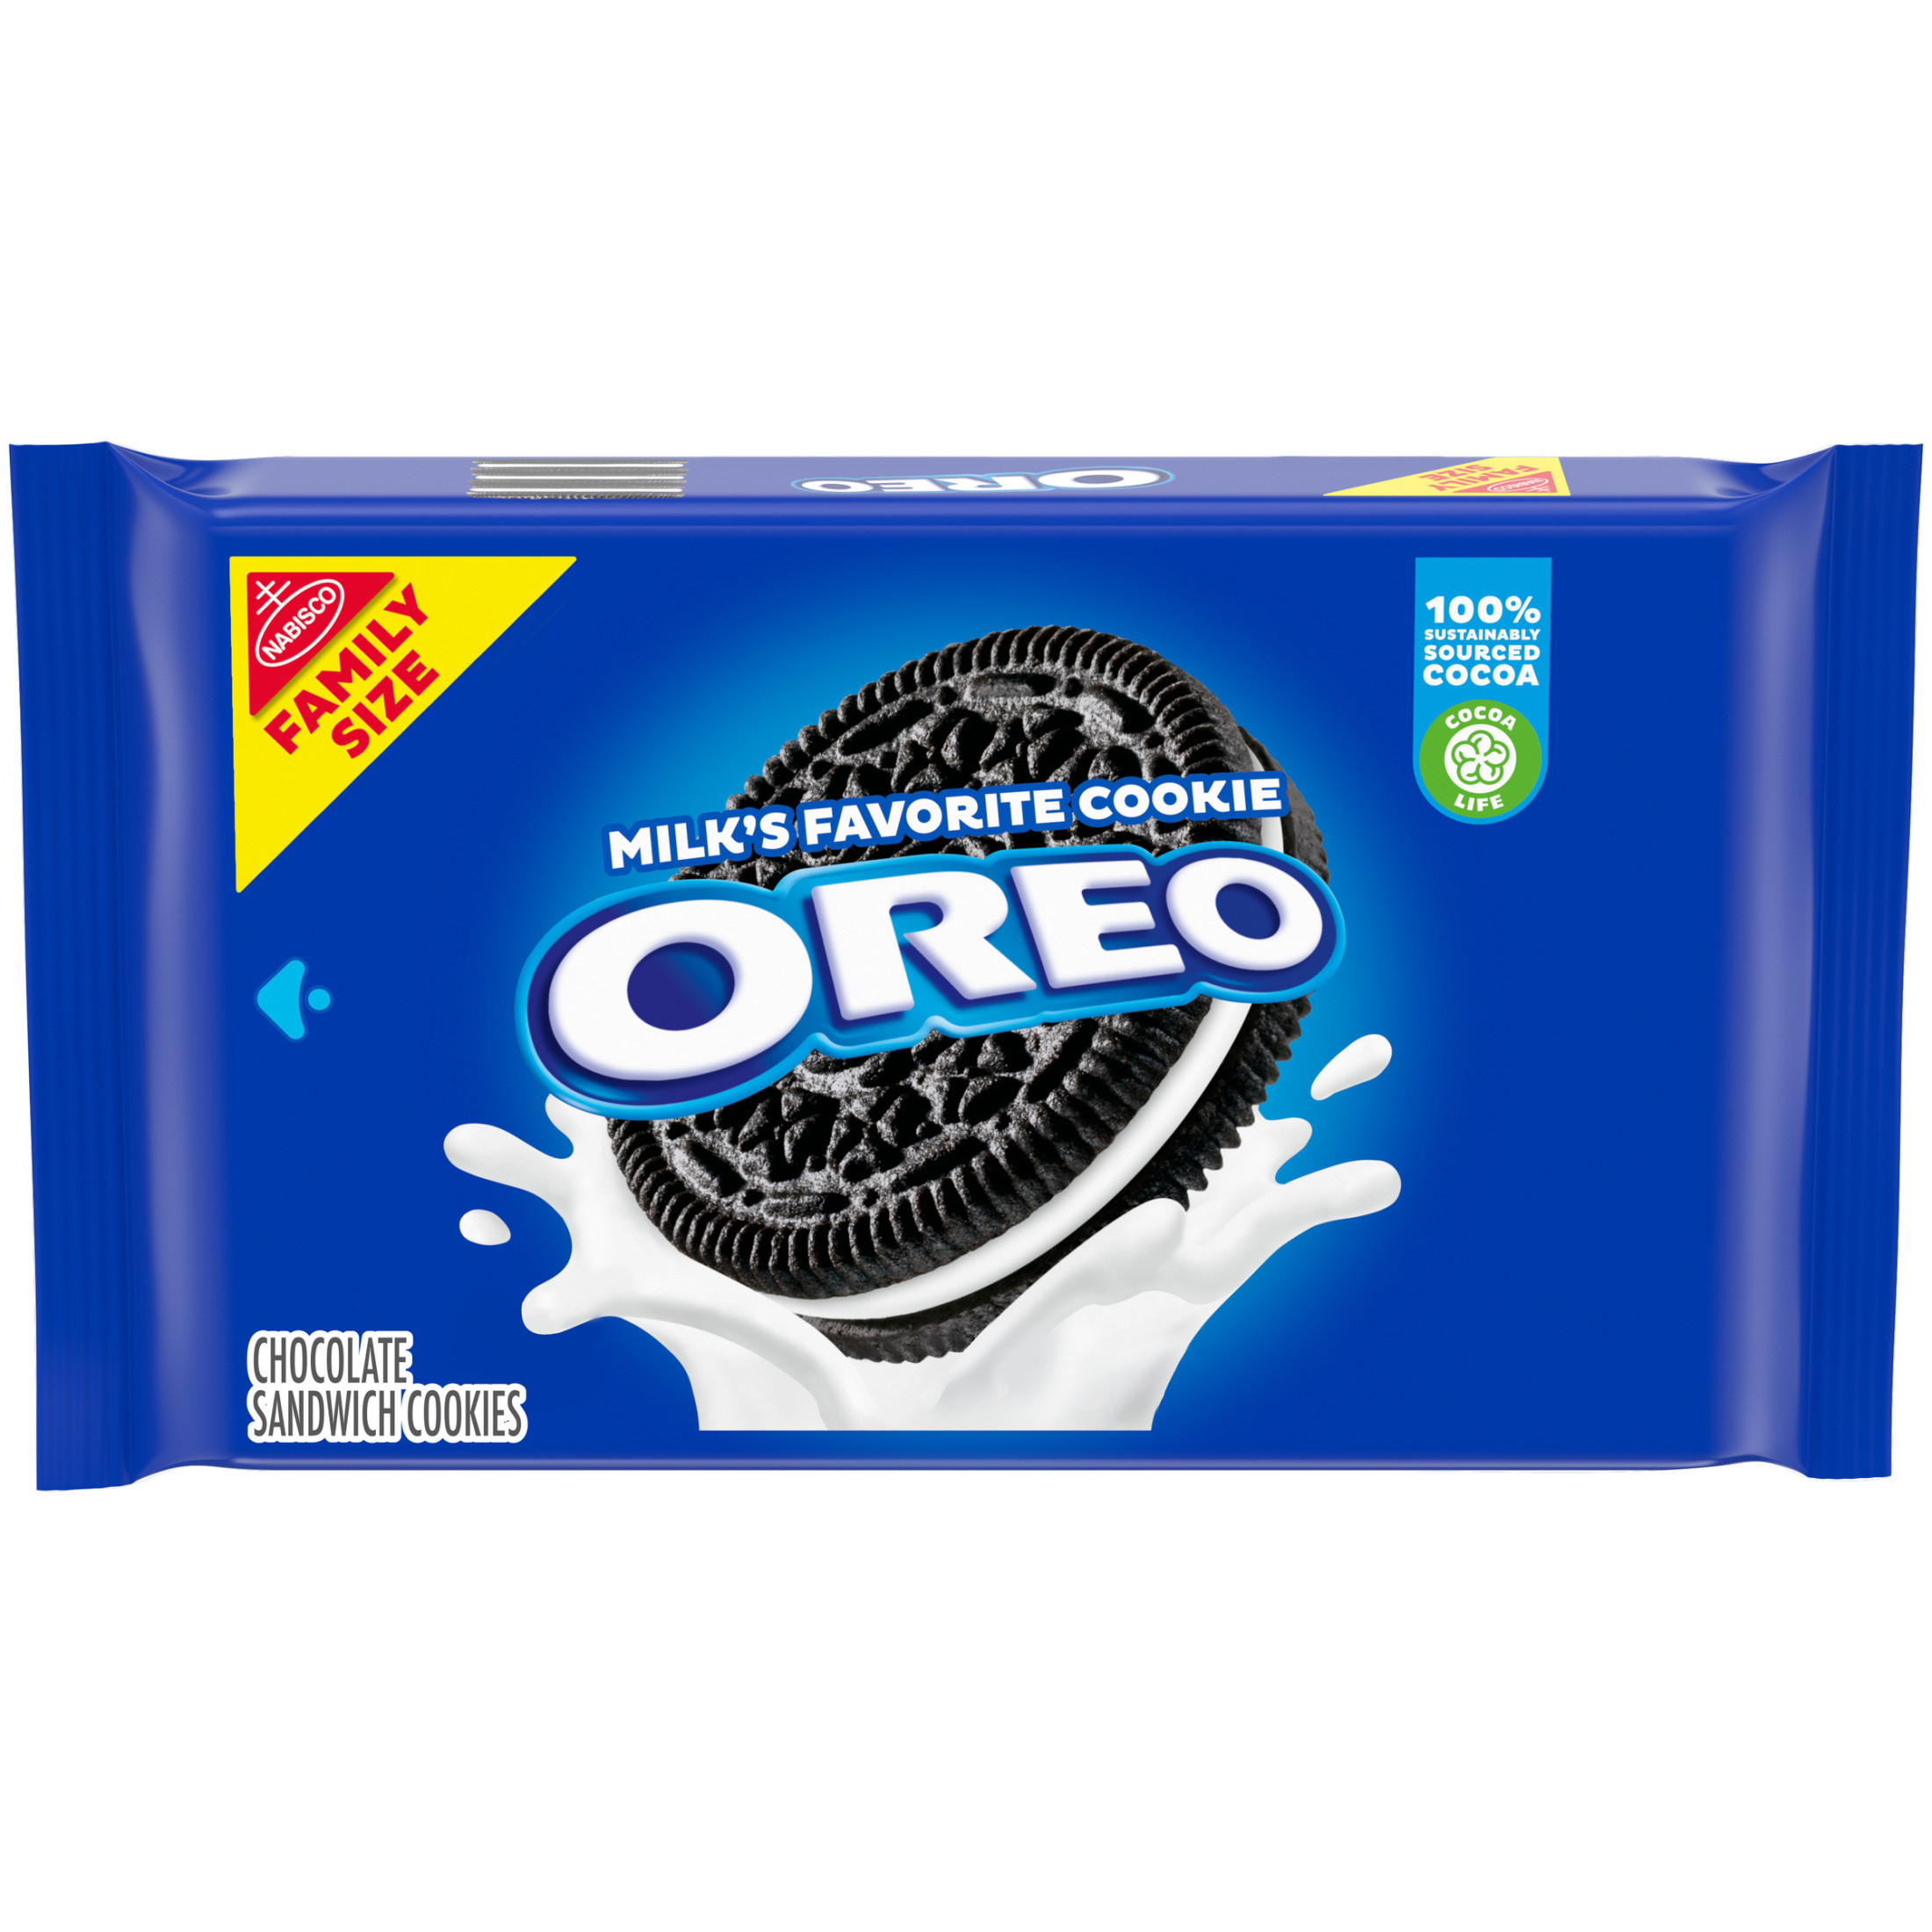 OREO Chocolate Sandwich Cookies, Family Size, 19.1 oz - image 1 of 15